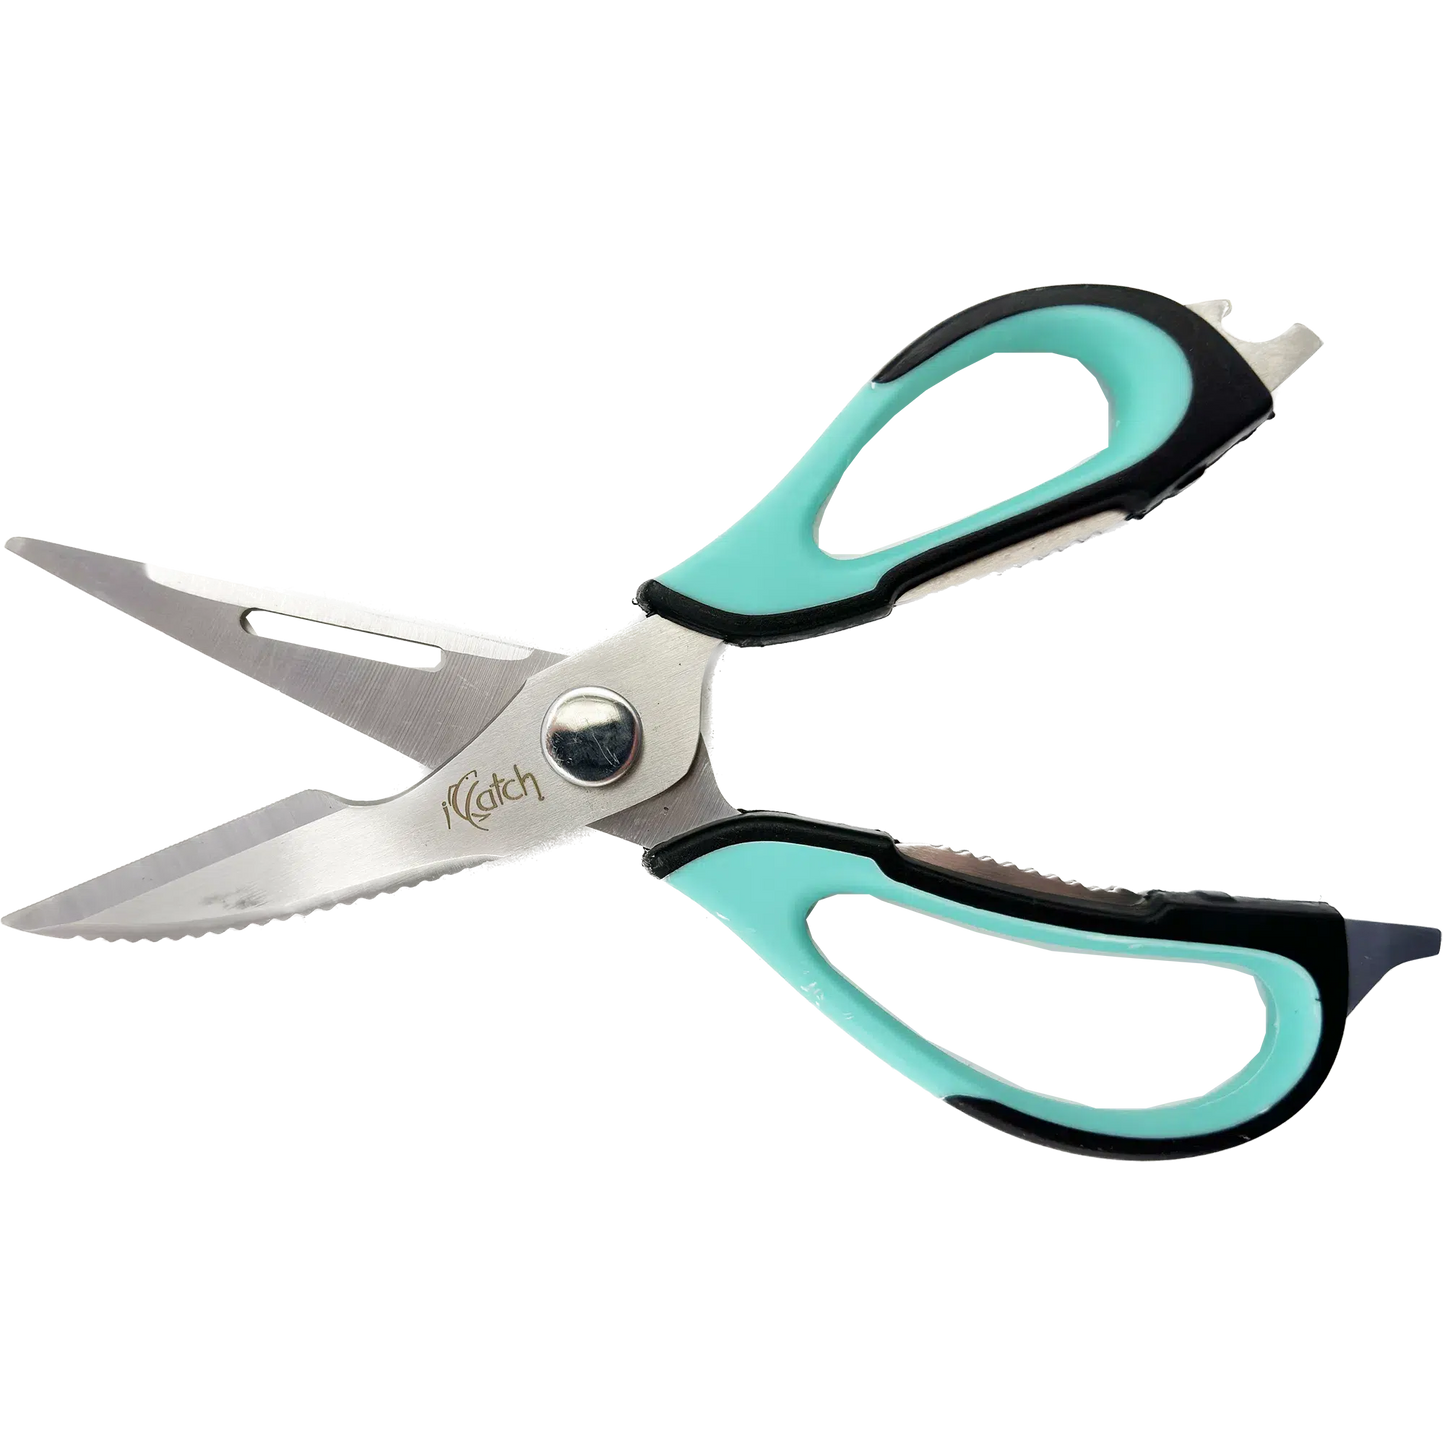 ICatch Stainless Steel Bait Shears-Tools - Scissors, Cutters, & Knot Tools-ICatch-Fishing Station